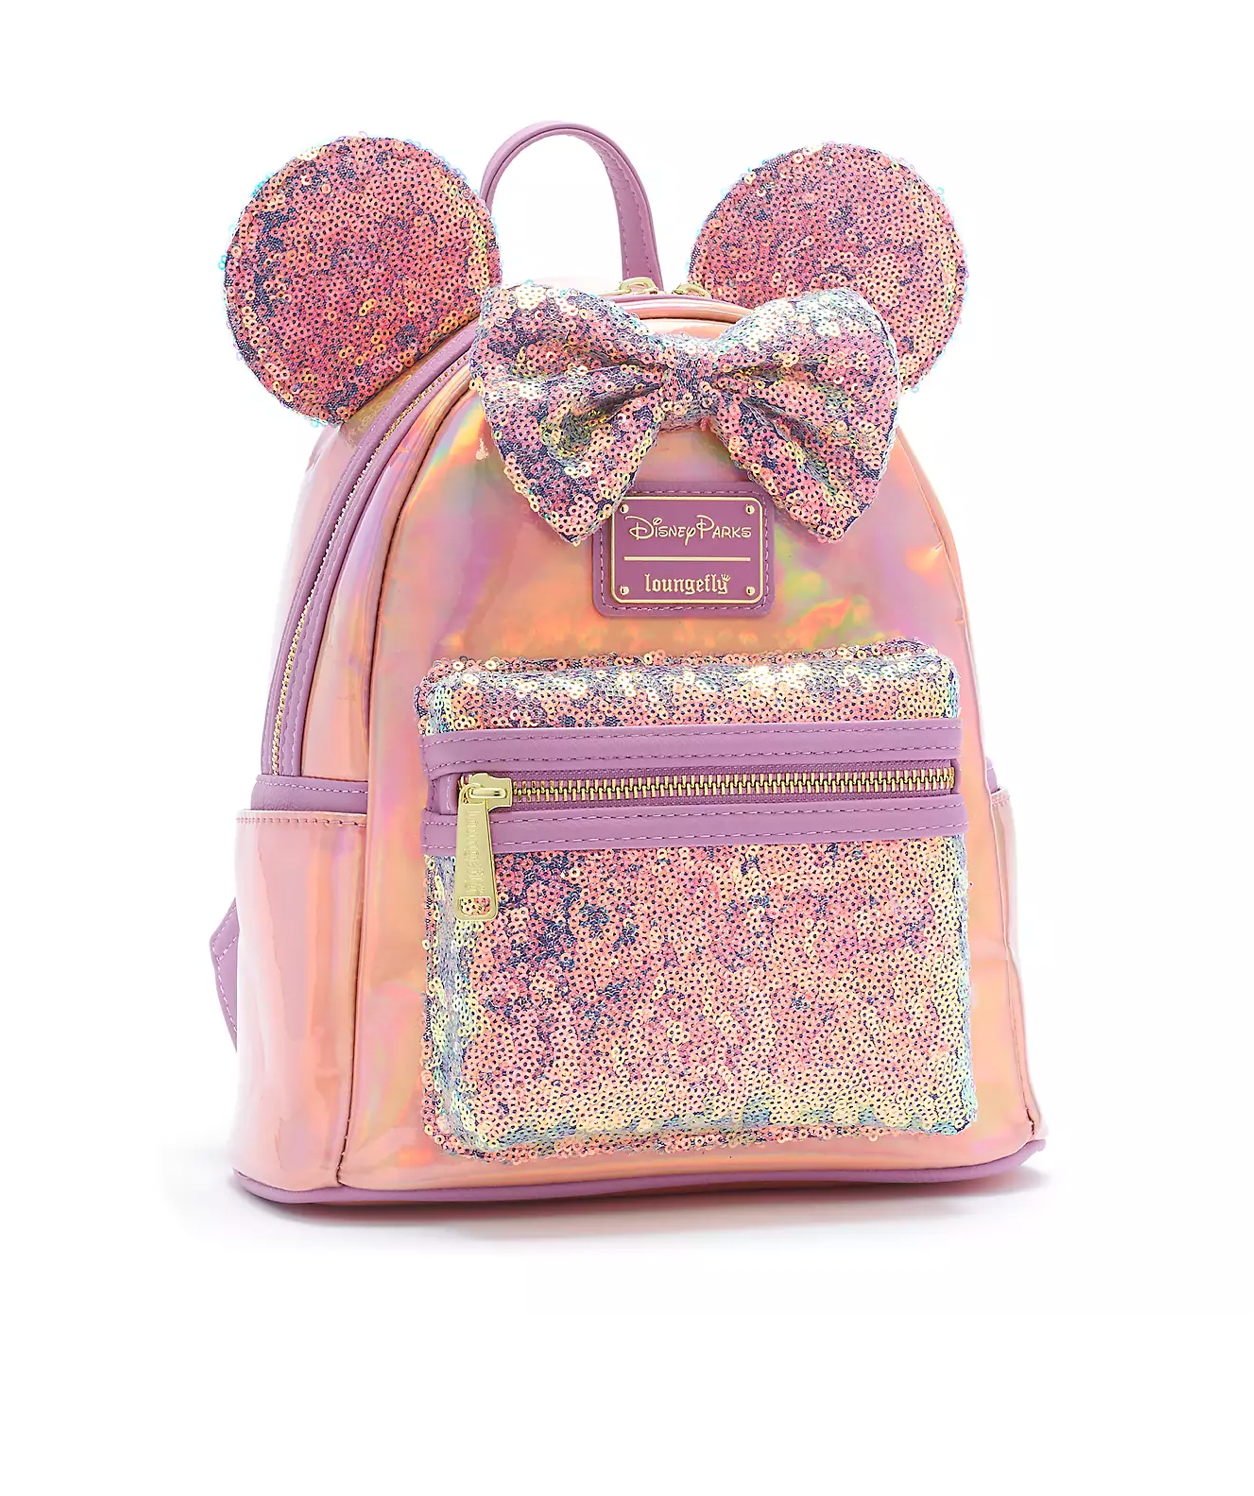 Disney Walt Disney World 50th Minnie Pink Earidescent Backpack New with Tag